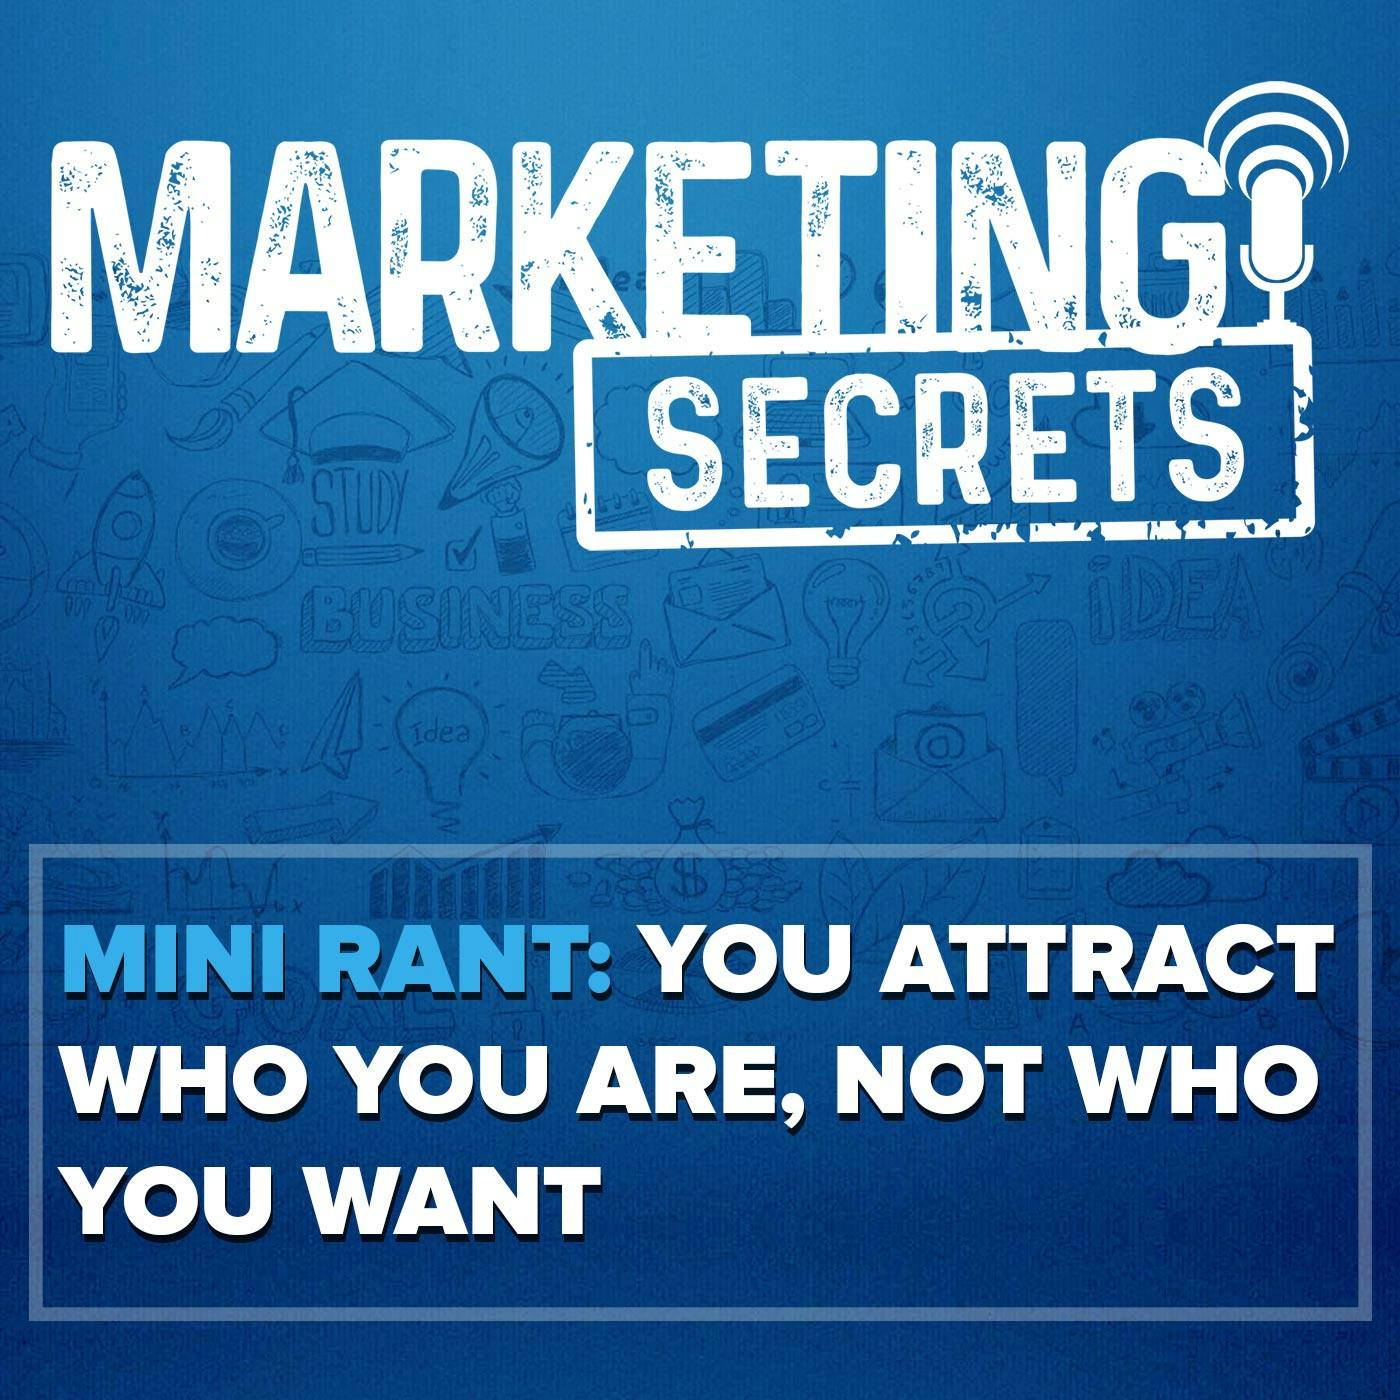 Mini Rant: You Attract Who You Are, Not Who You Want